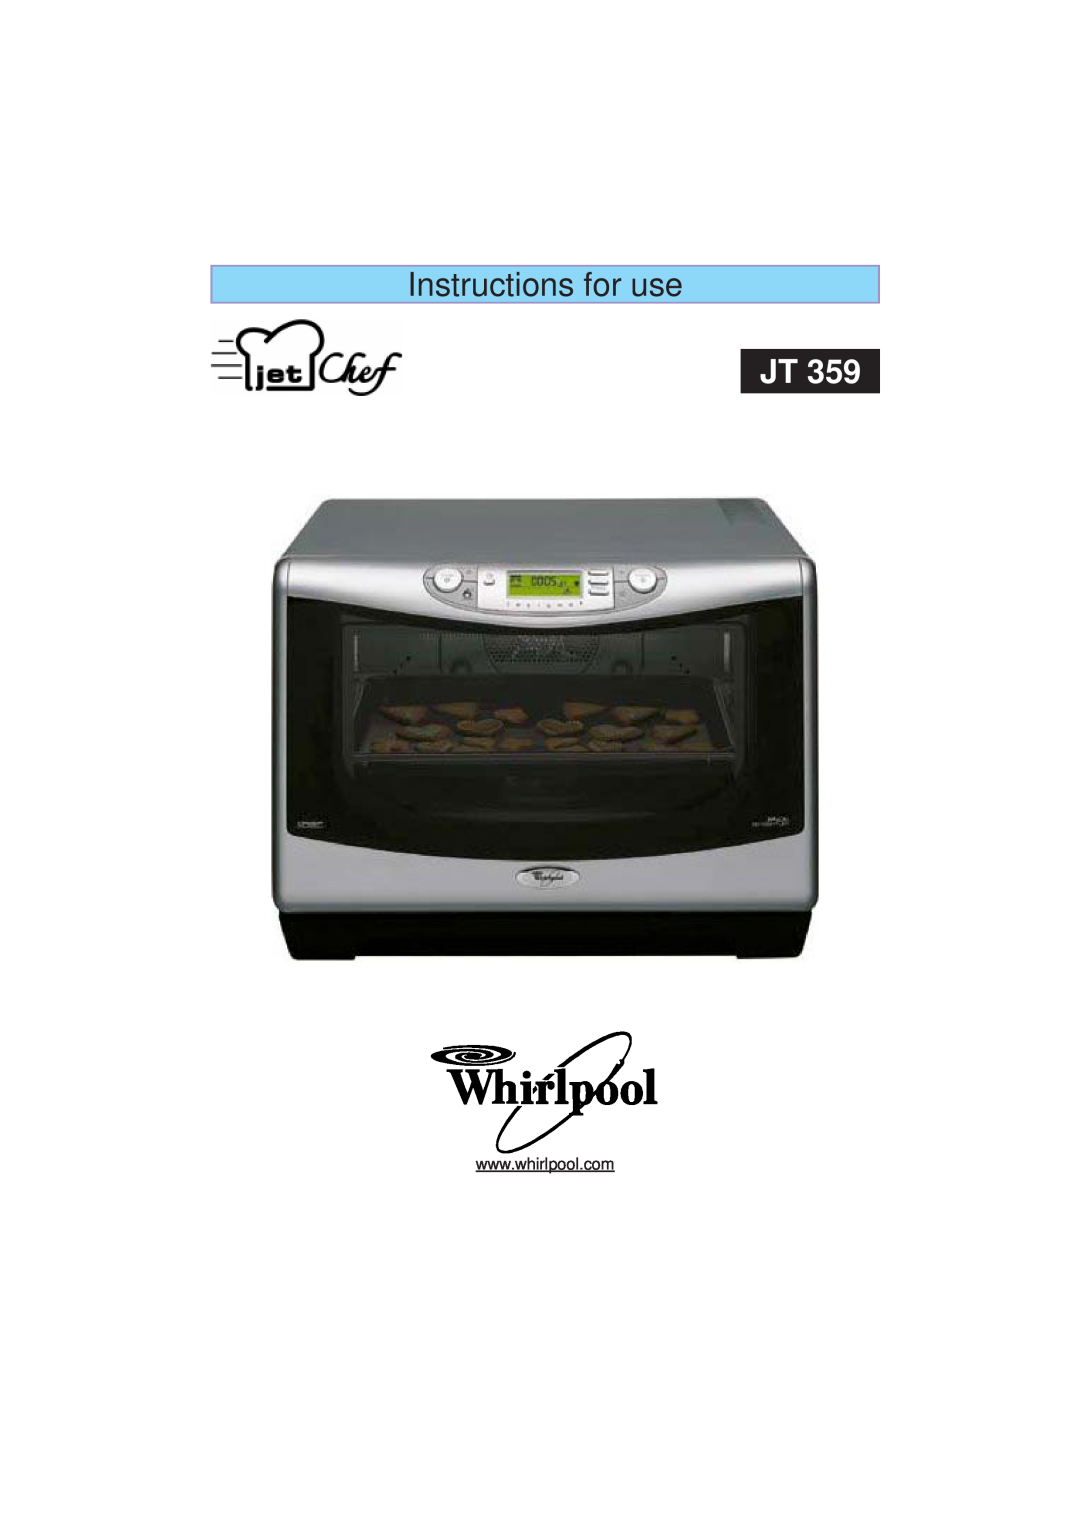 Whirlpool JT 359 manual Instructions for use 